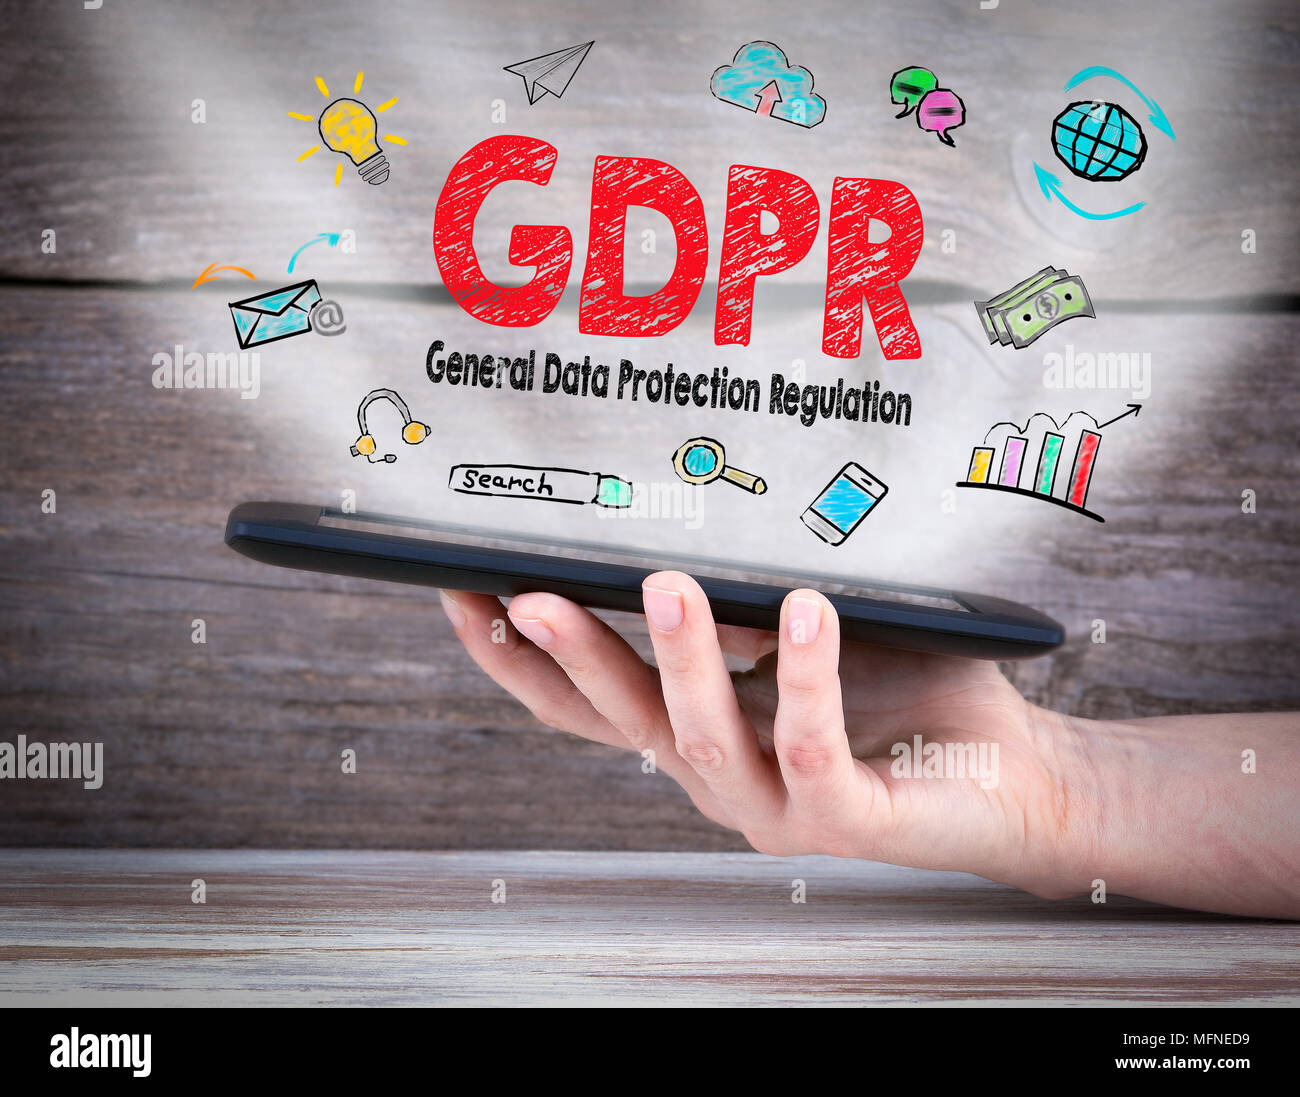 GDPR General Data Protection Regulation concept Stock Photo